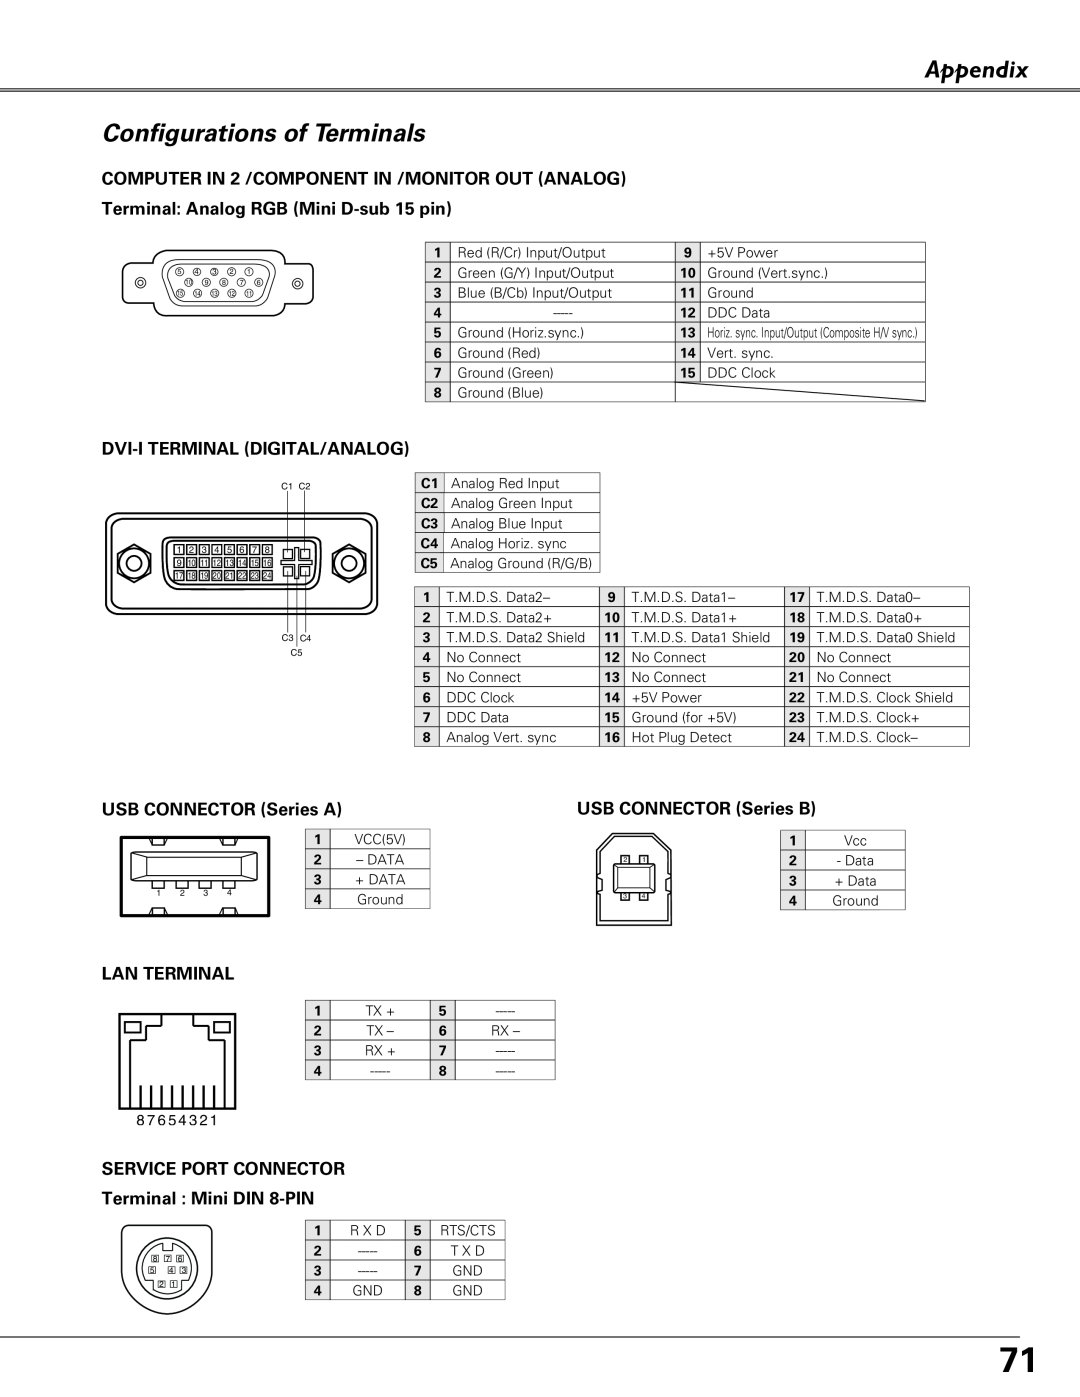 Sanyo PLC-XU84 Appendix Configurations of Terminals, COMPUTER IN 2 /COMPONENT IN /MONITOR OUT ANALOG, Lan Terminal 